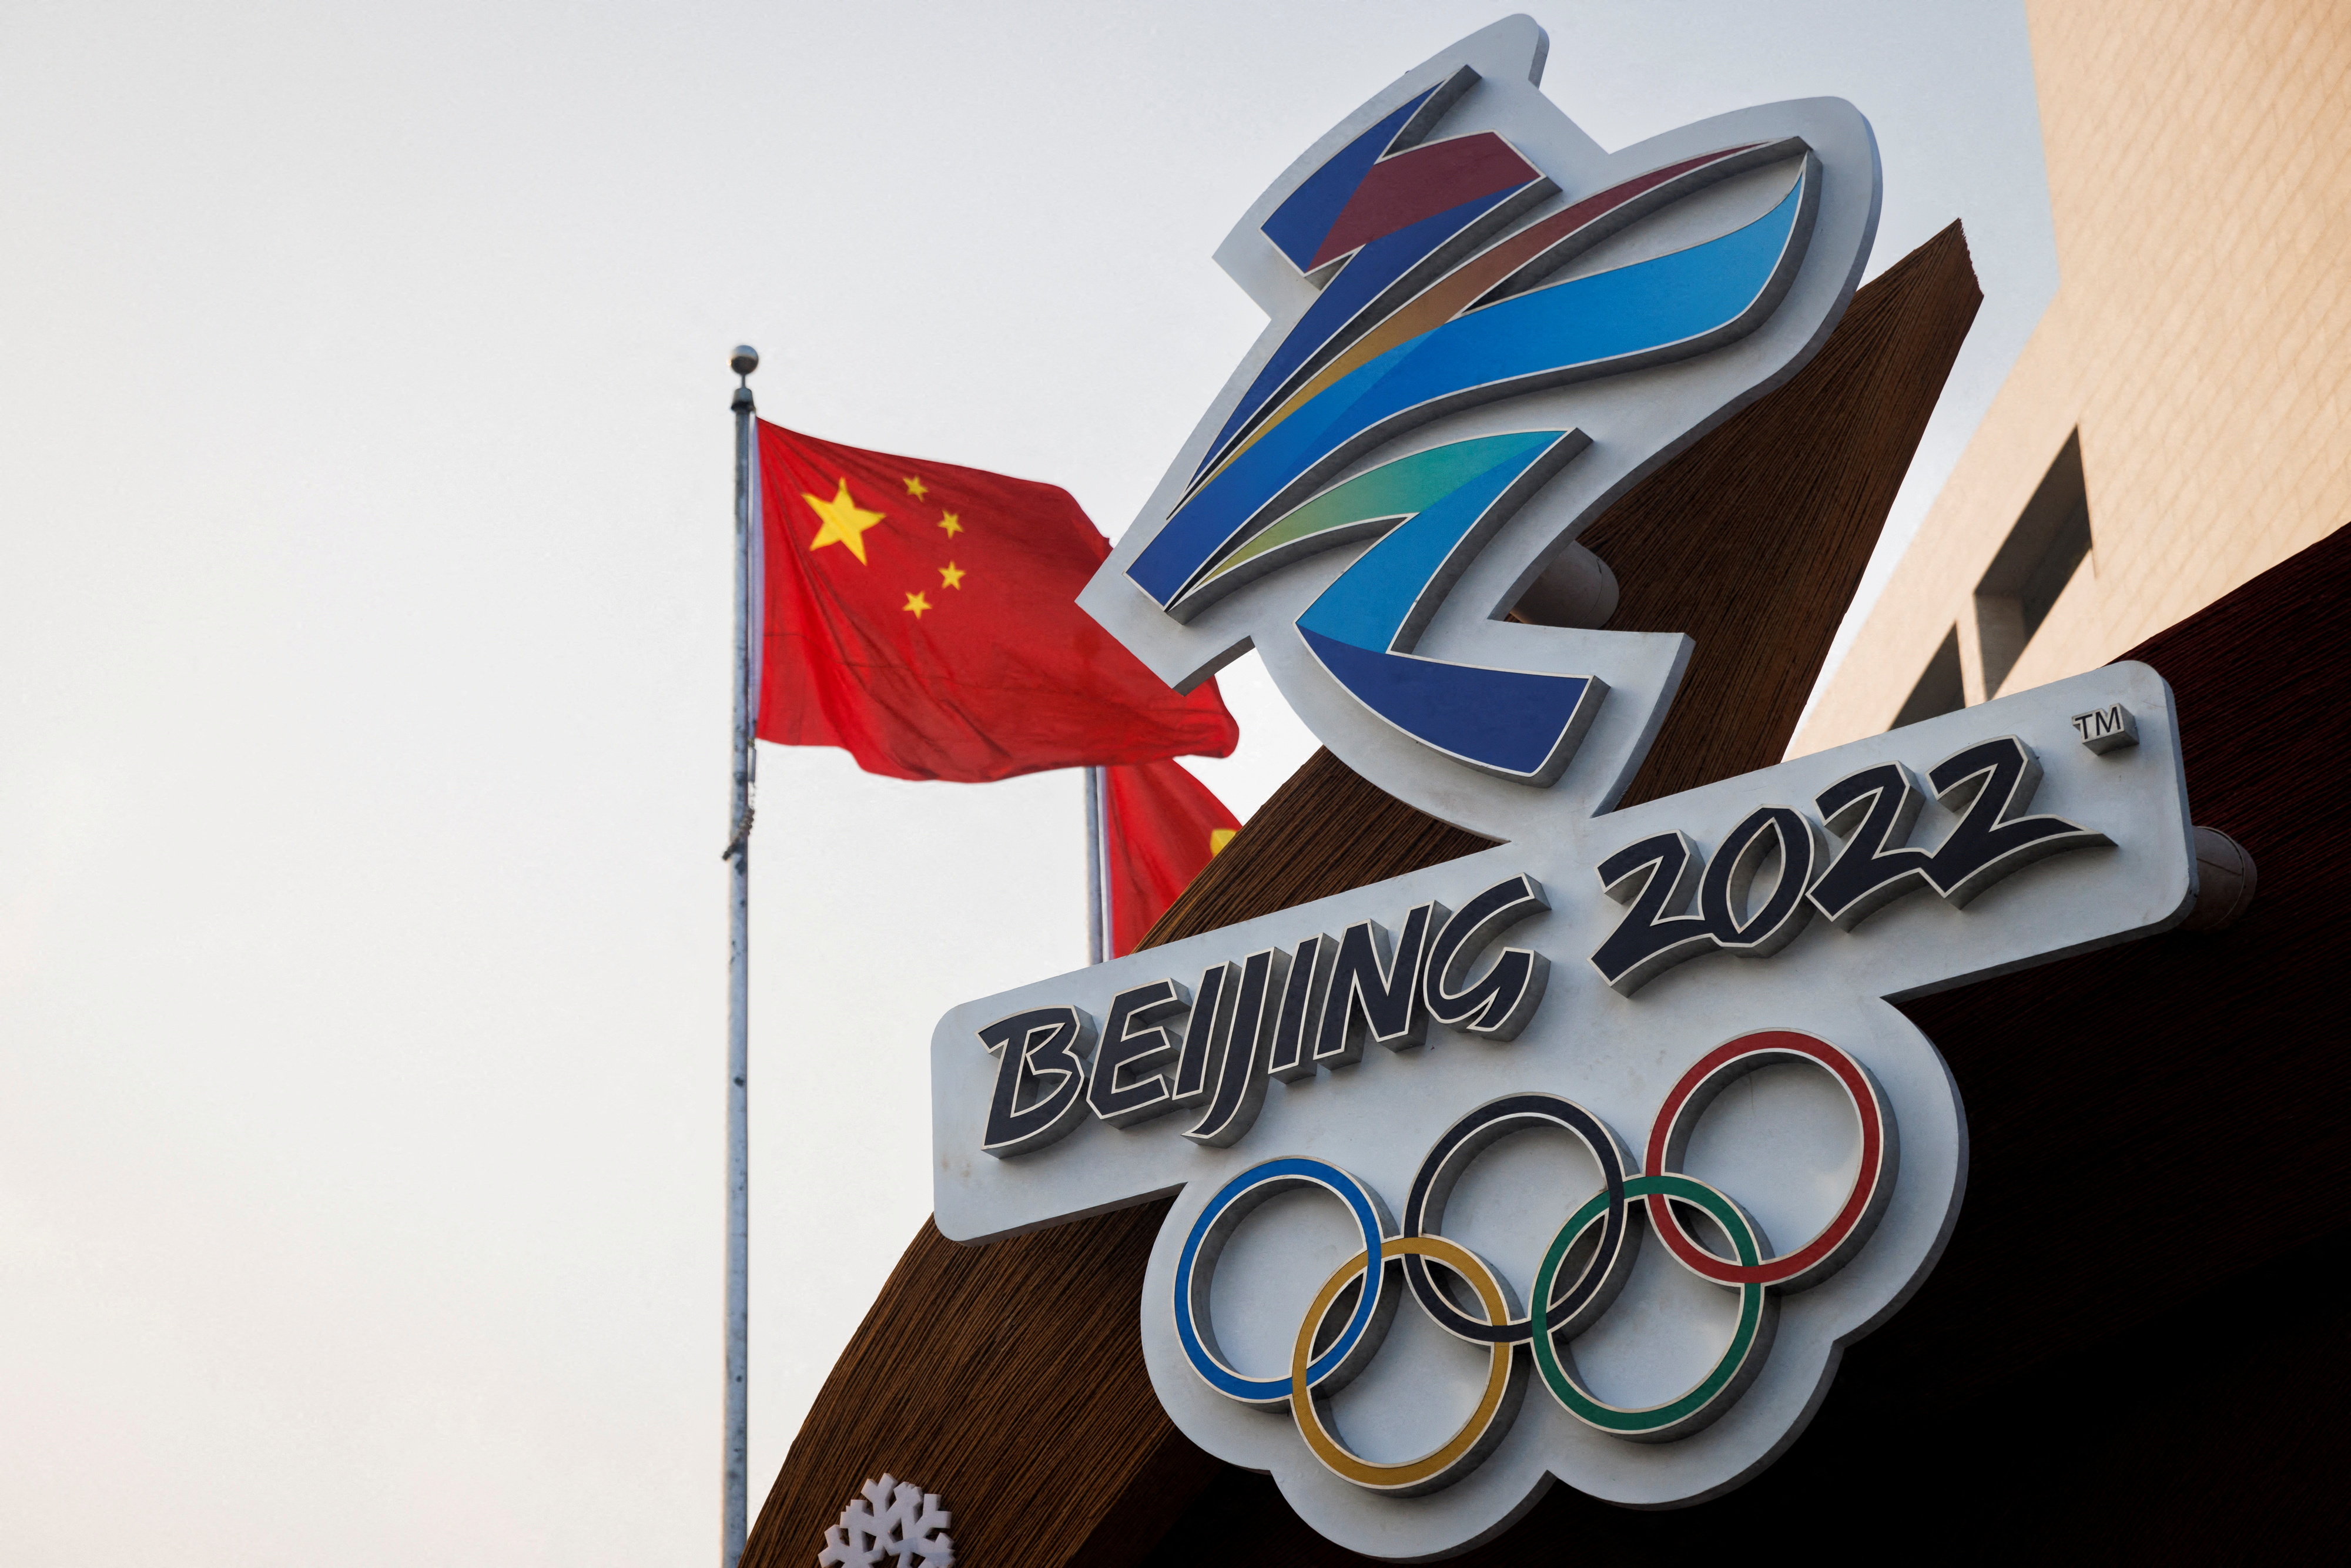 The Chinese national flag flies behind the logo of the Beijing 2022 Winter Olympics in Beijing